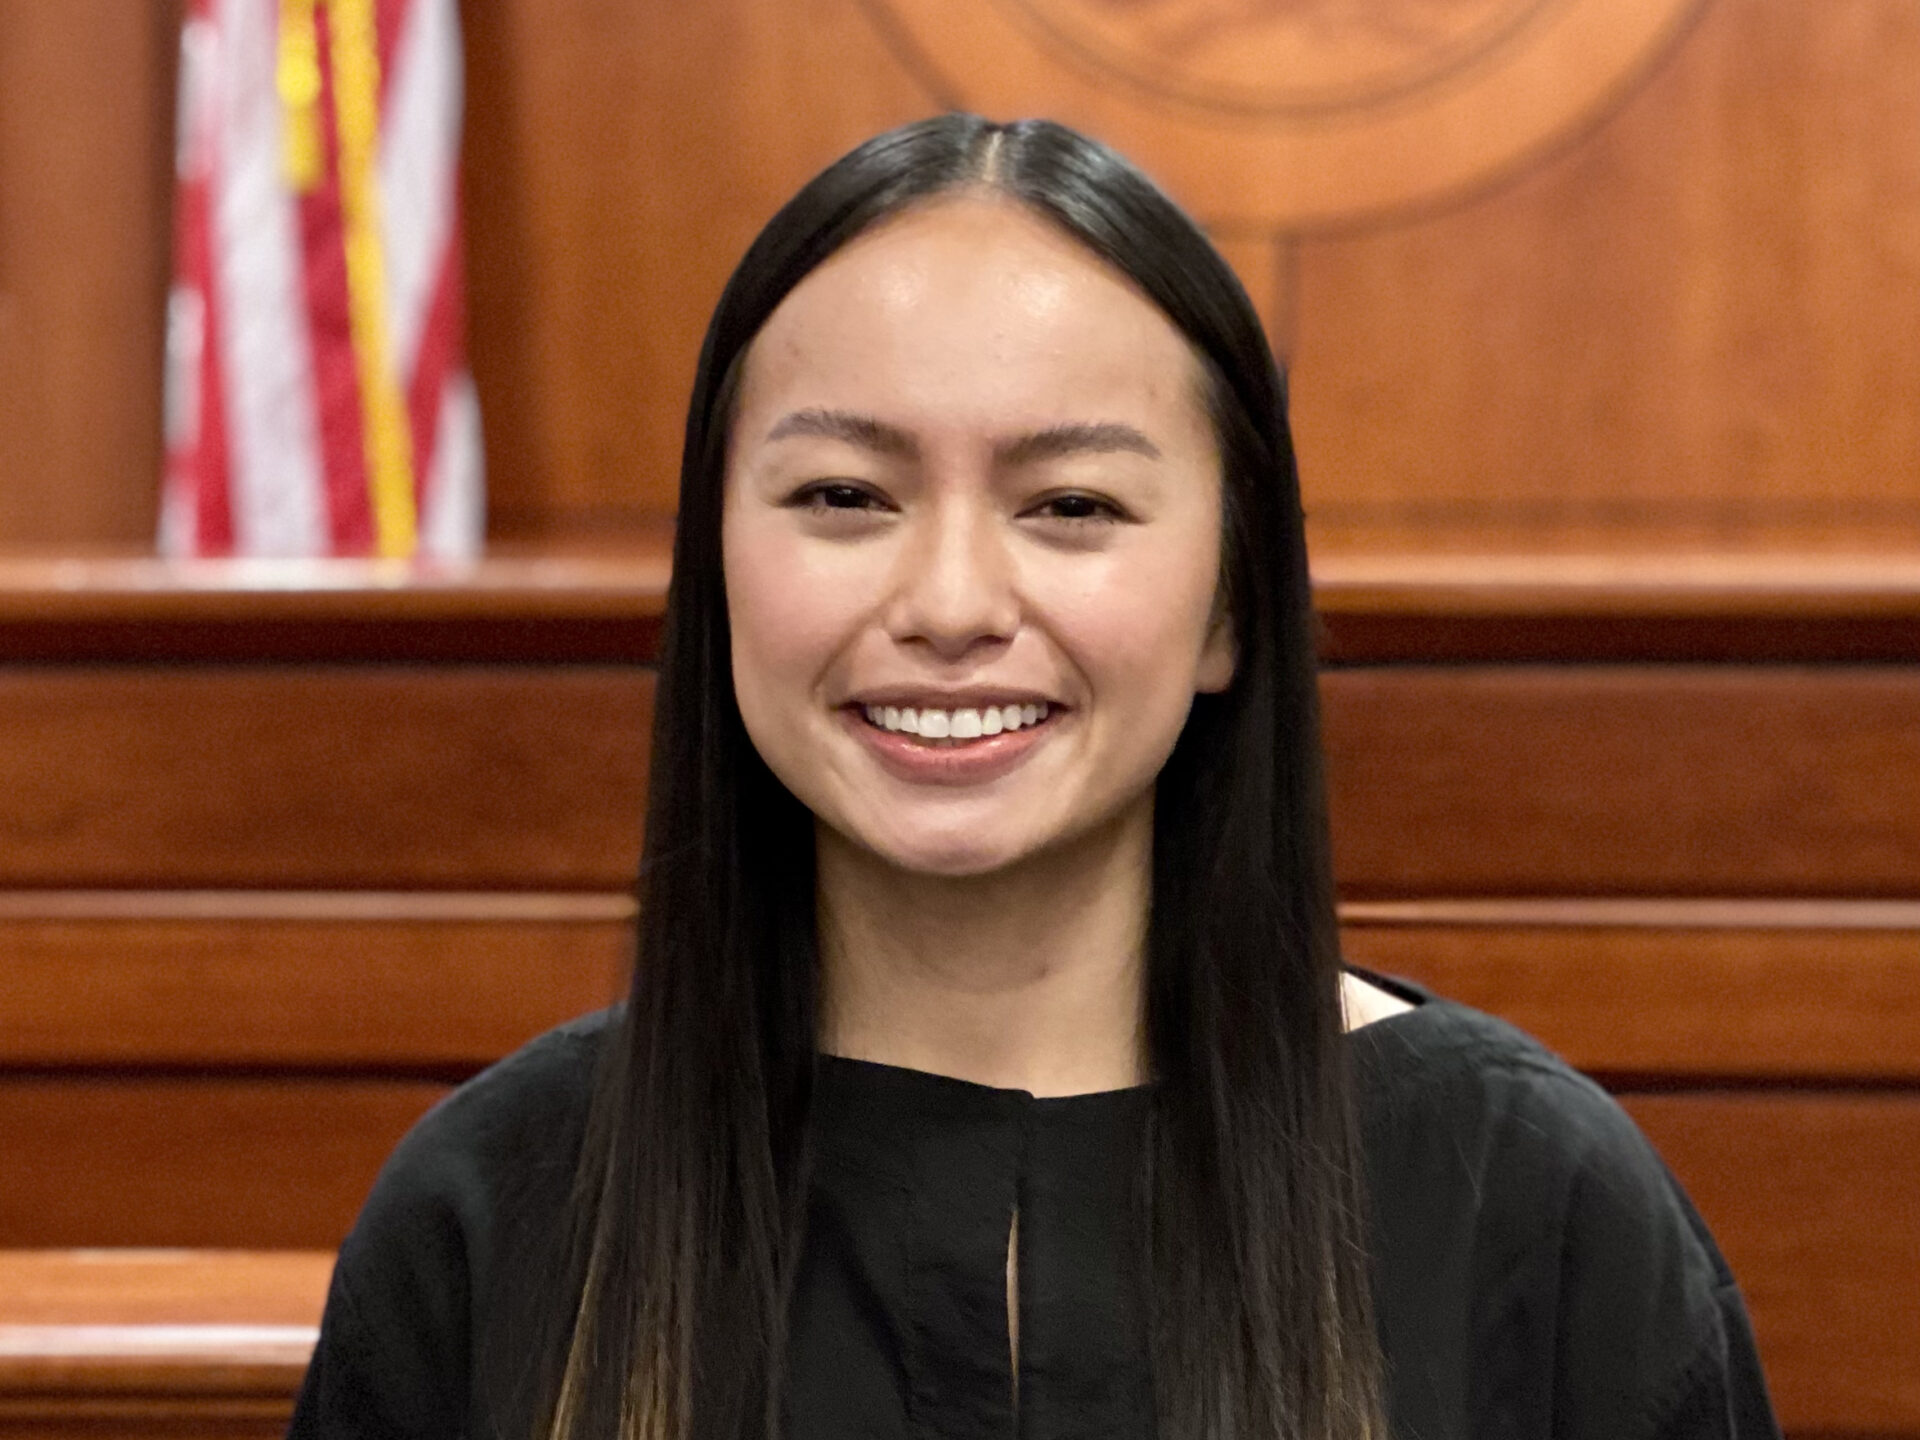 Portrait of Mimi Nguyen in a courtroom